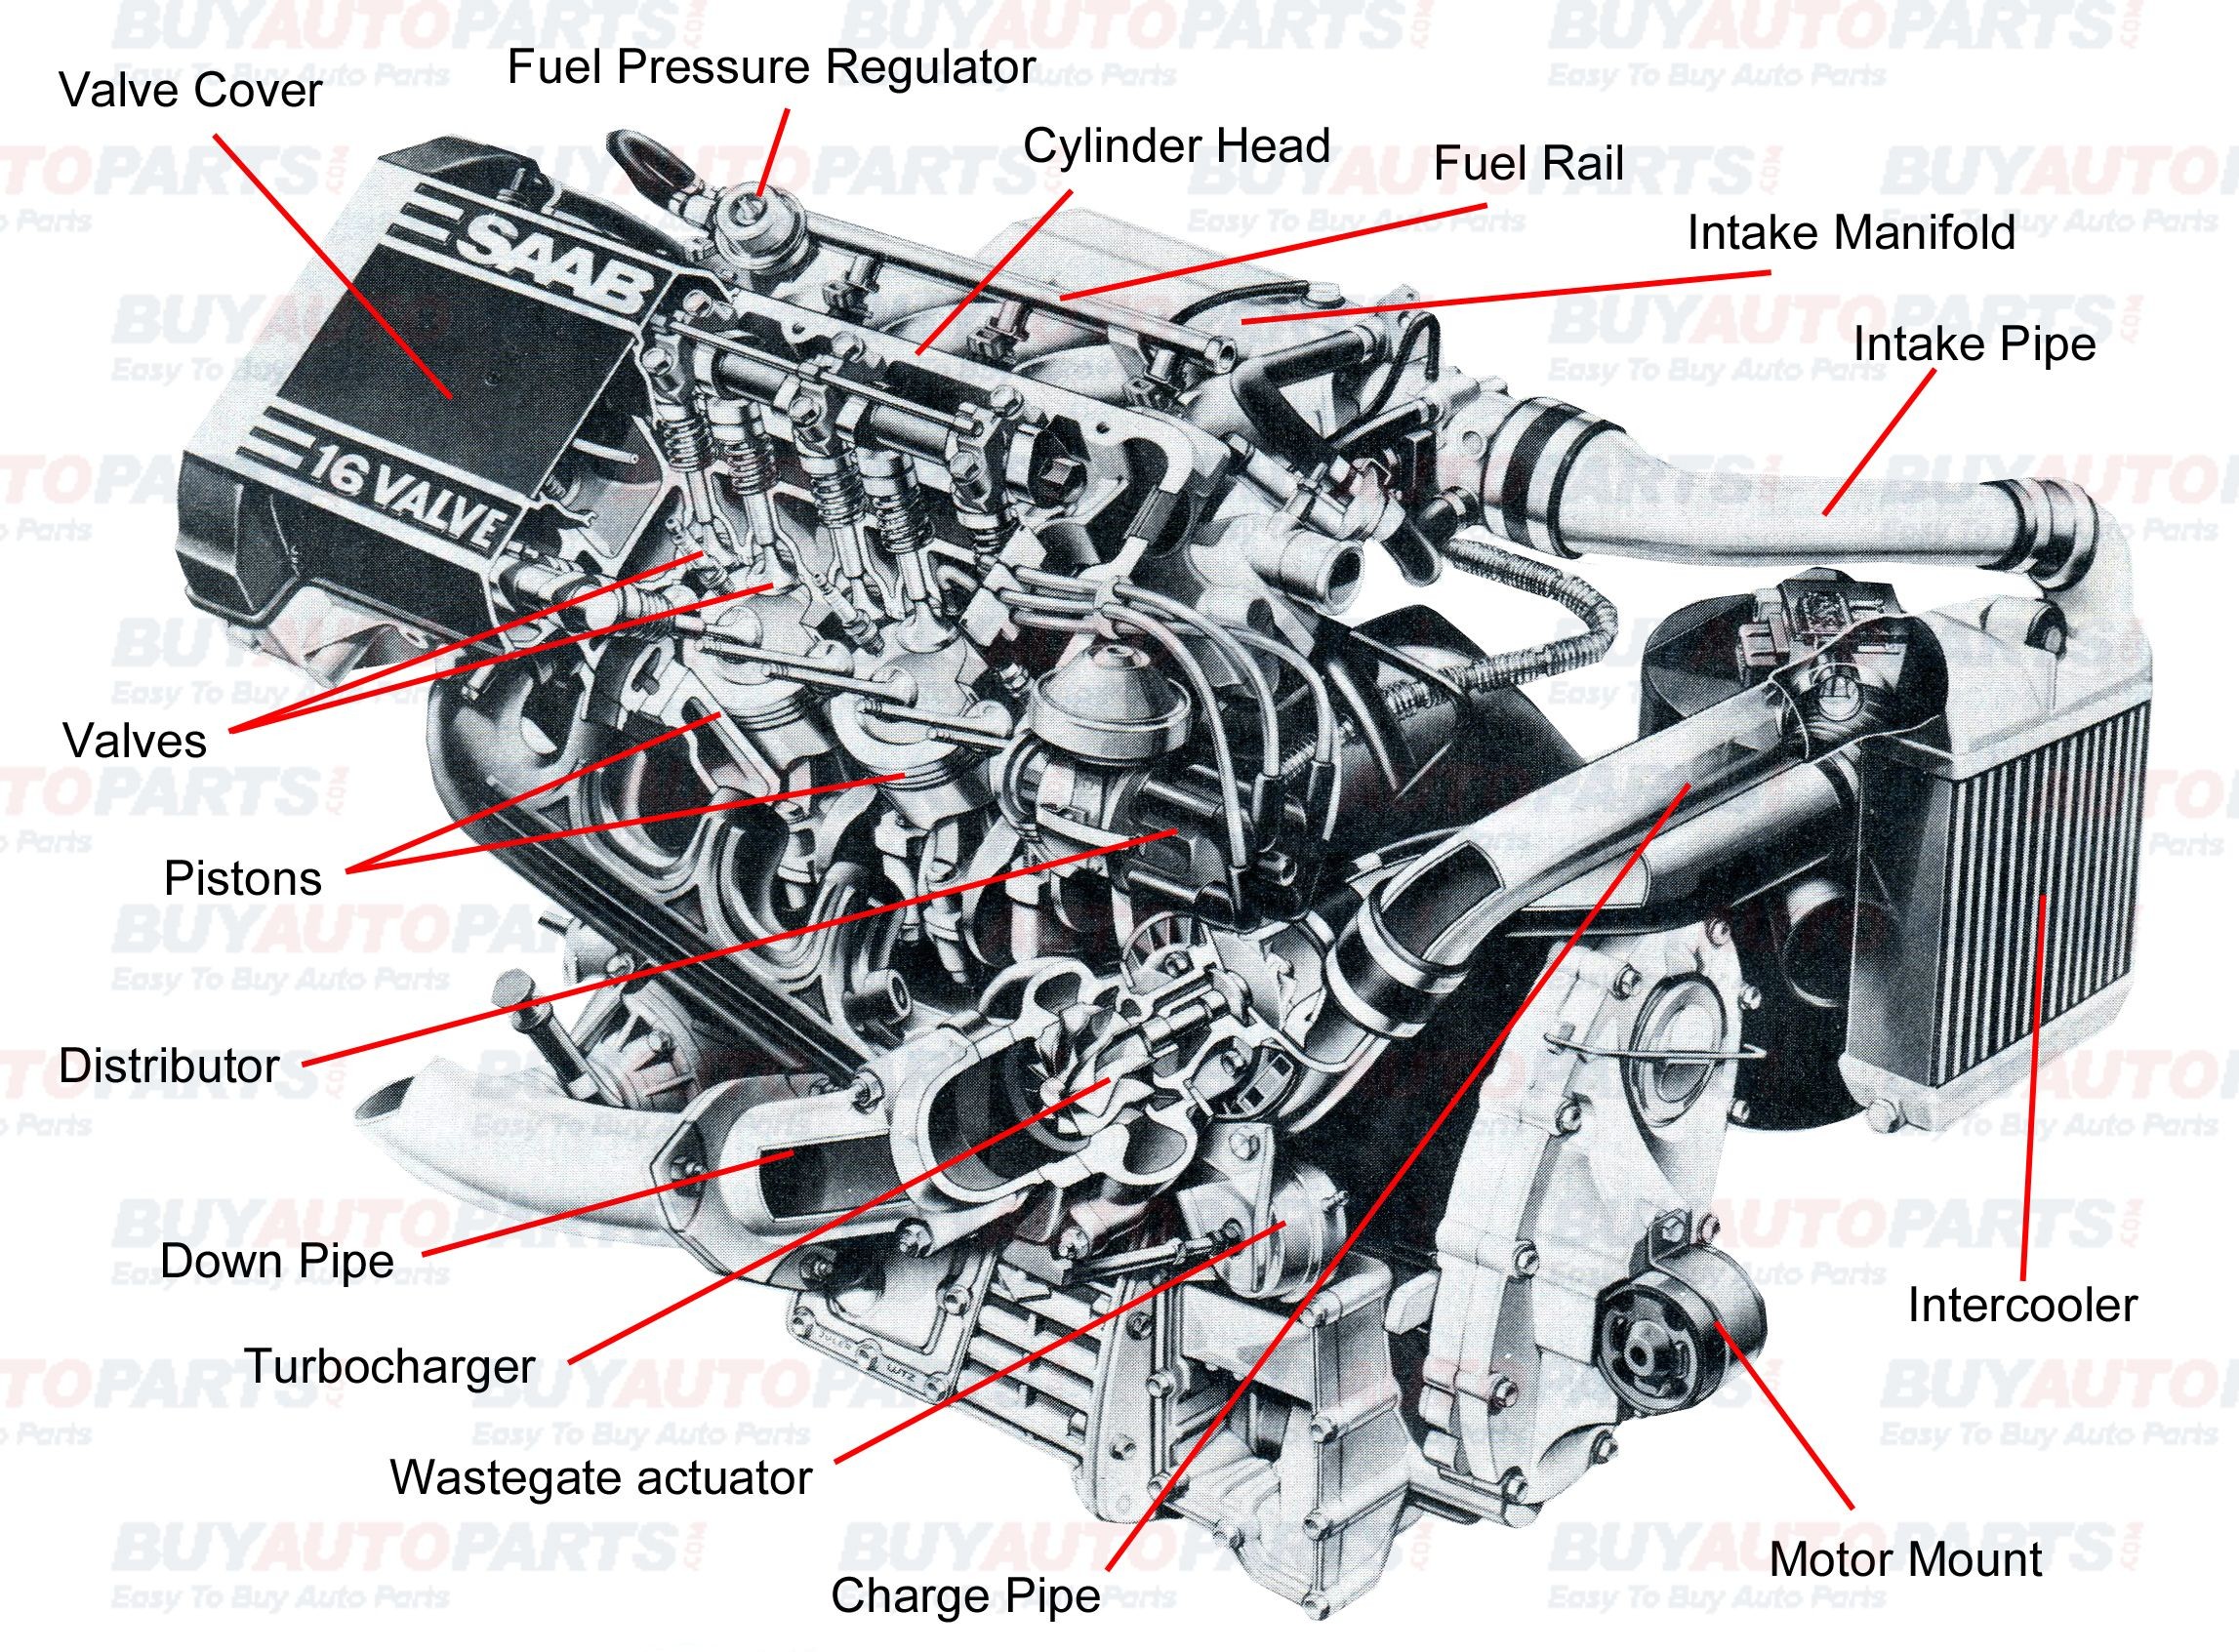 How Bike Engine Works with Diagram Pin by Jimmiejanet Testellamwfz On What Does An Engine with Turbo Of How Bike Engine Works with Diagram